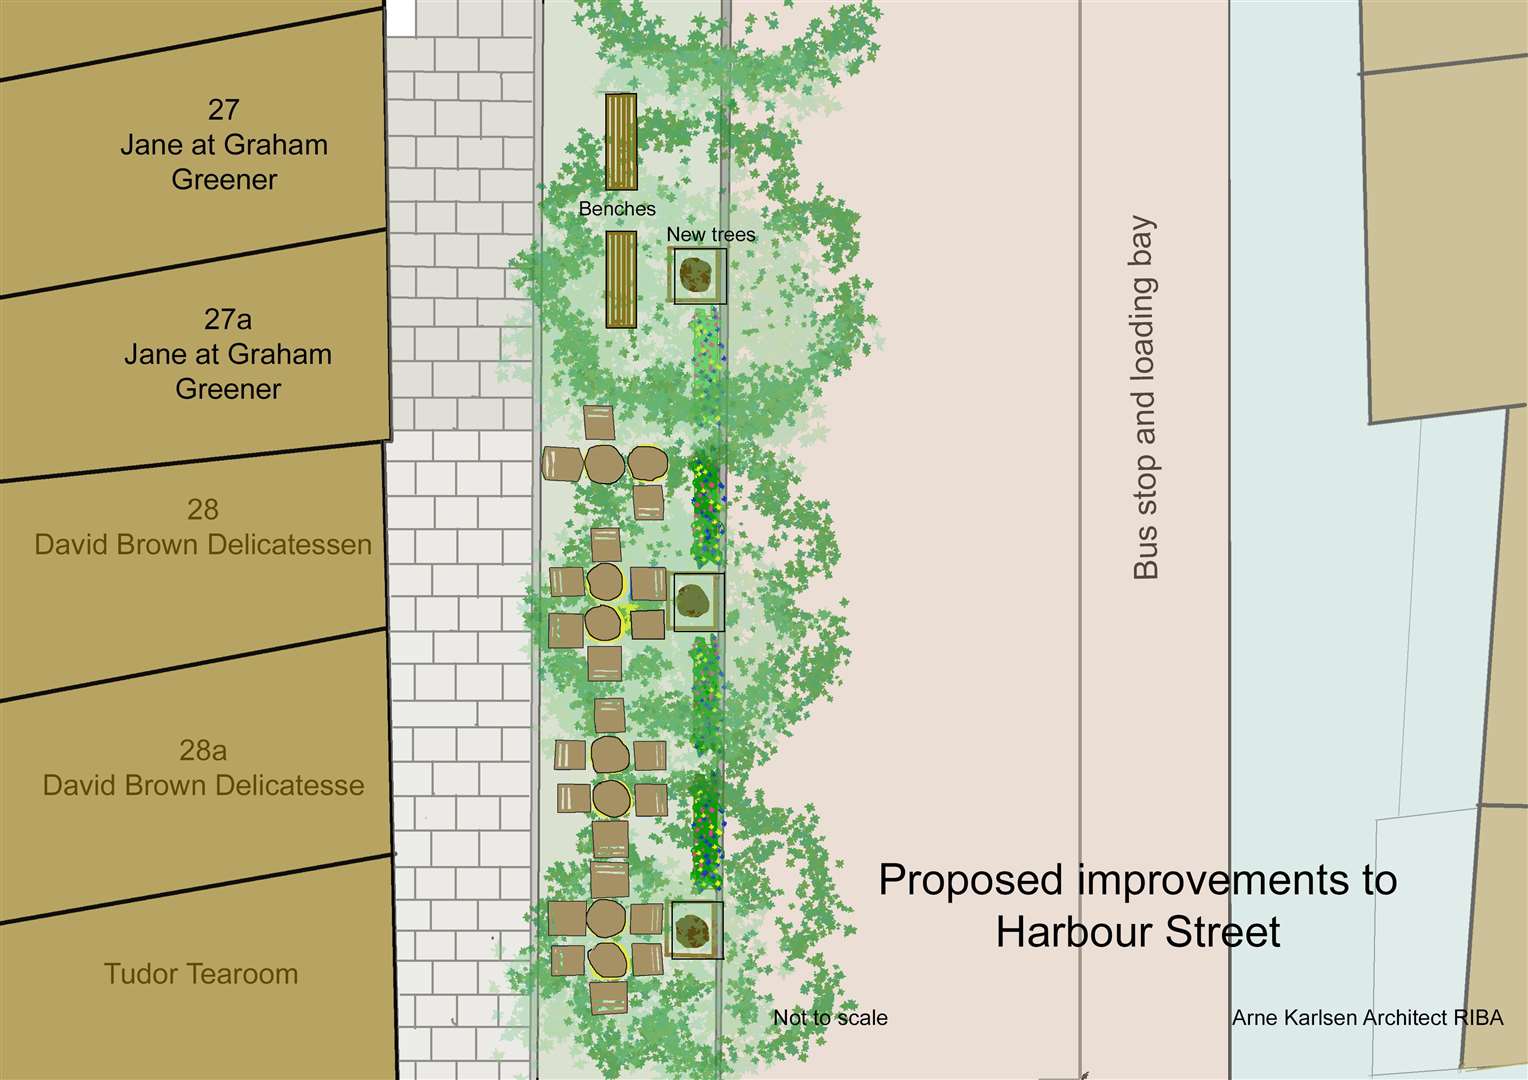 Arne Karlsen's plan to improve Harbour Street and replace parking spaces with a pavement and trees. Picture: Arne Karlsen